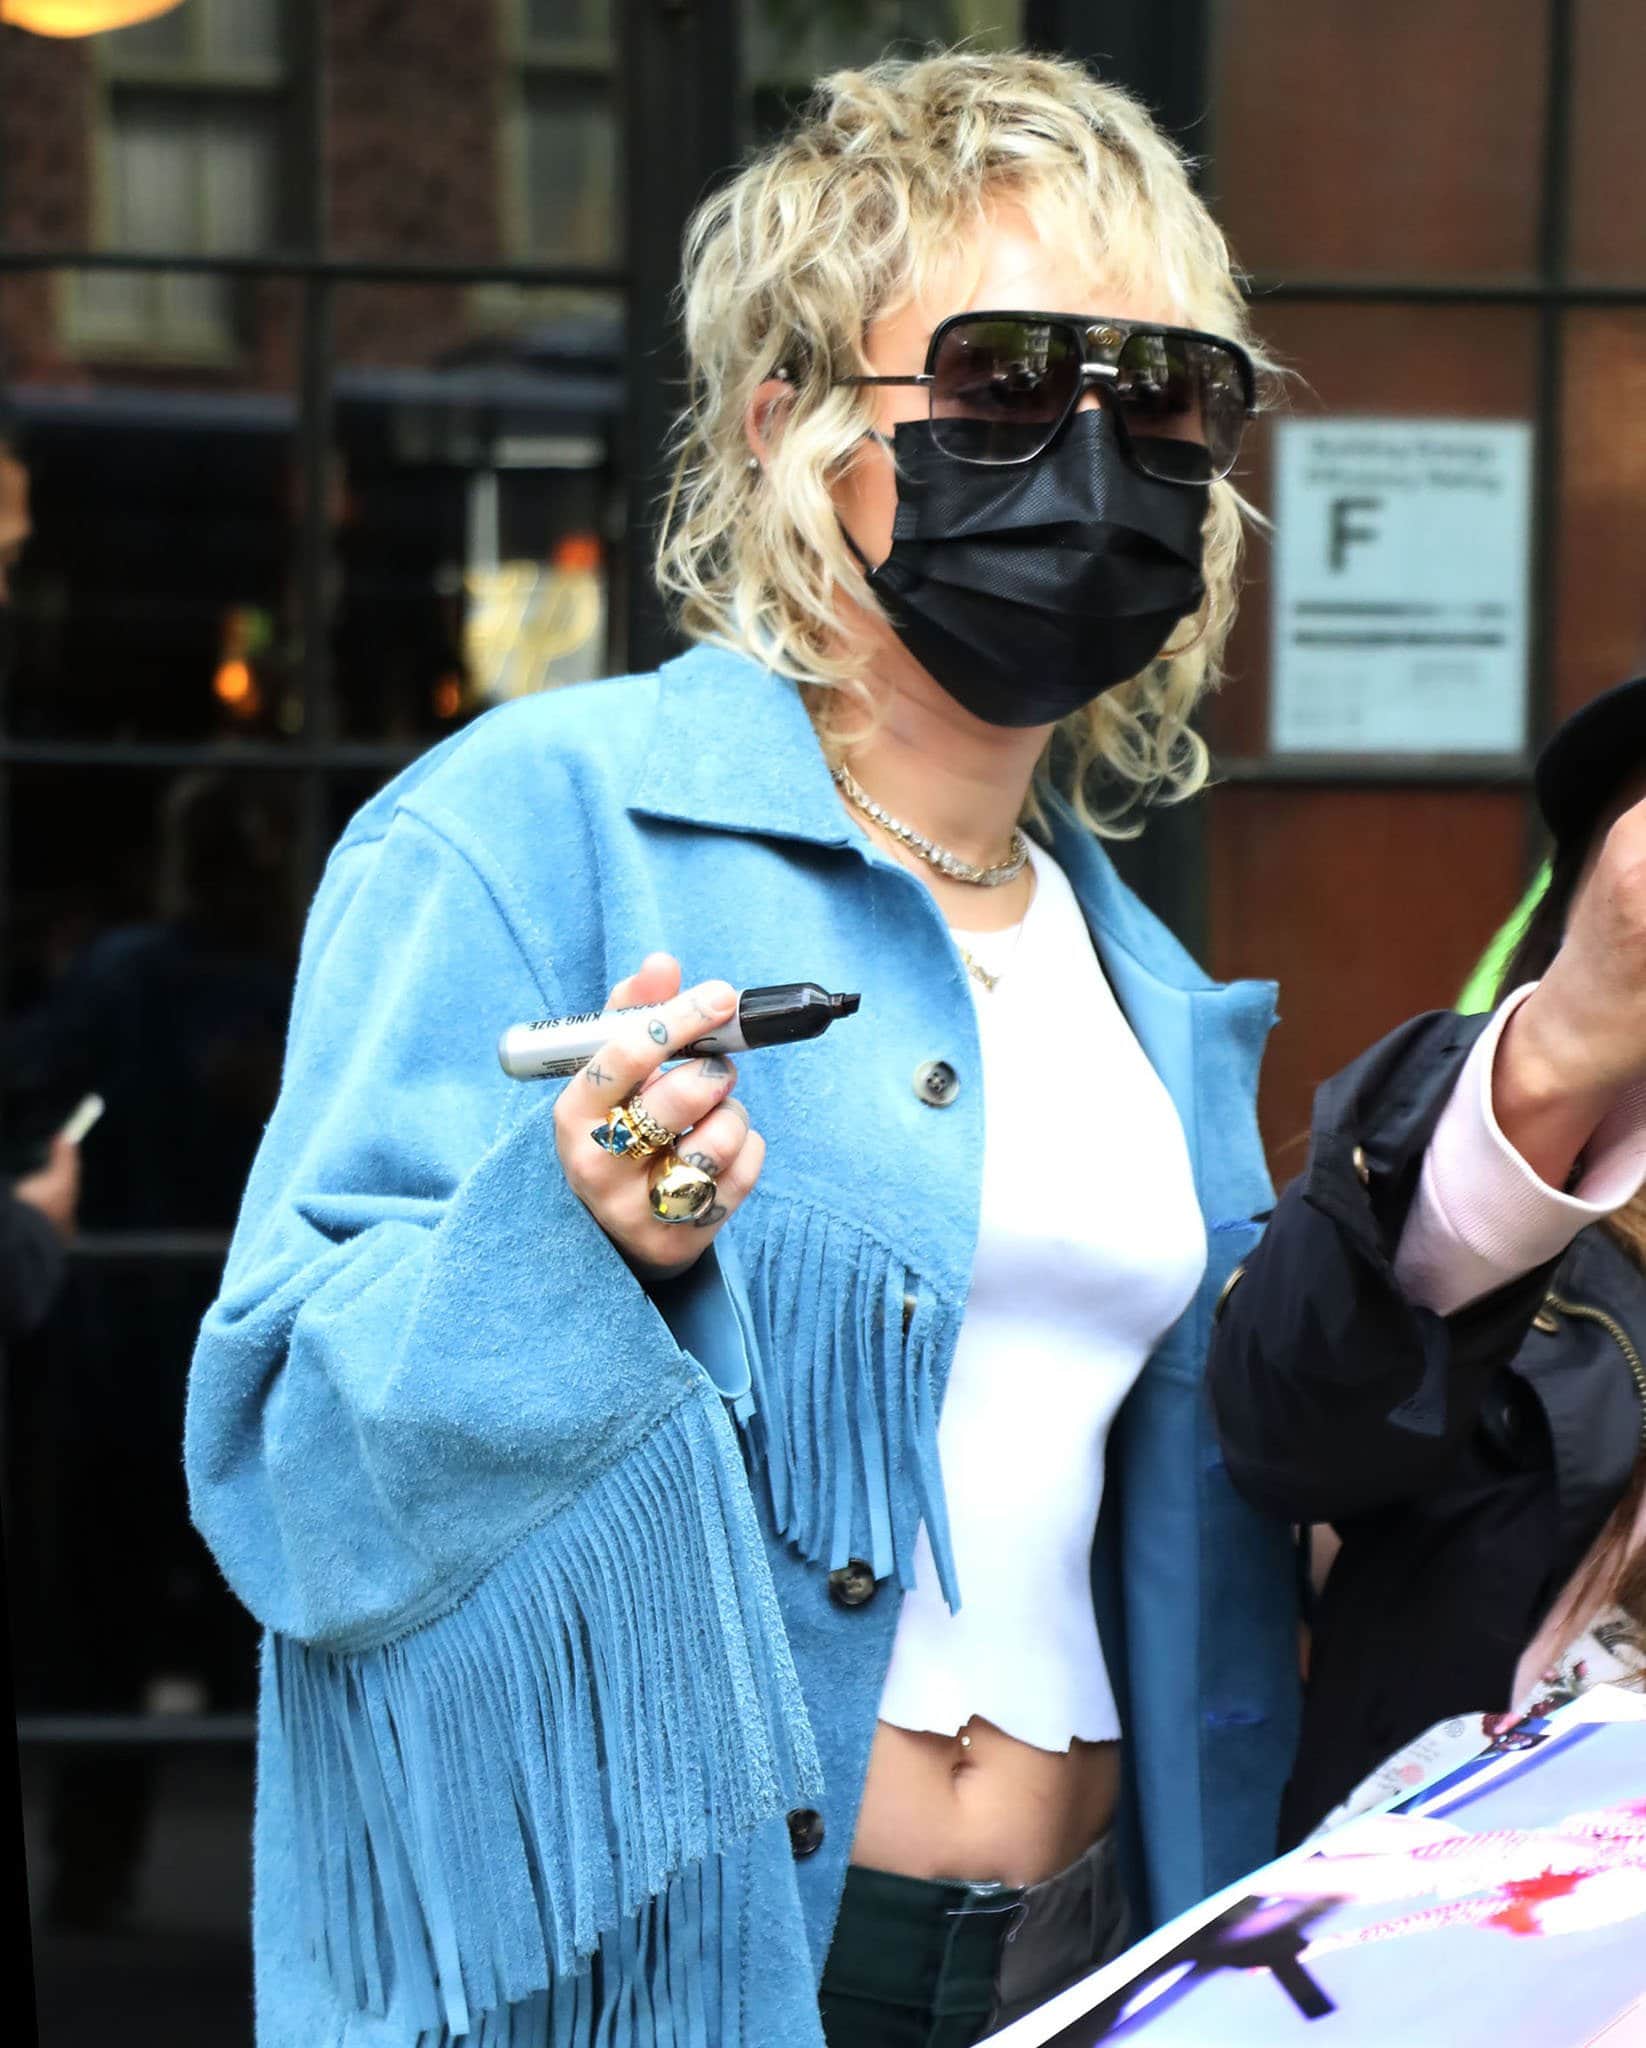 Miley Cyrus wears shaggy blonde hairstyle and hides her face behind rectangular sunglasses and a black face mask